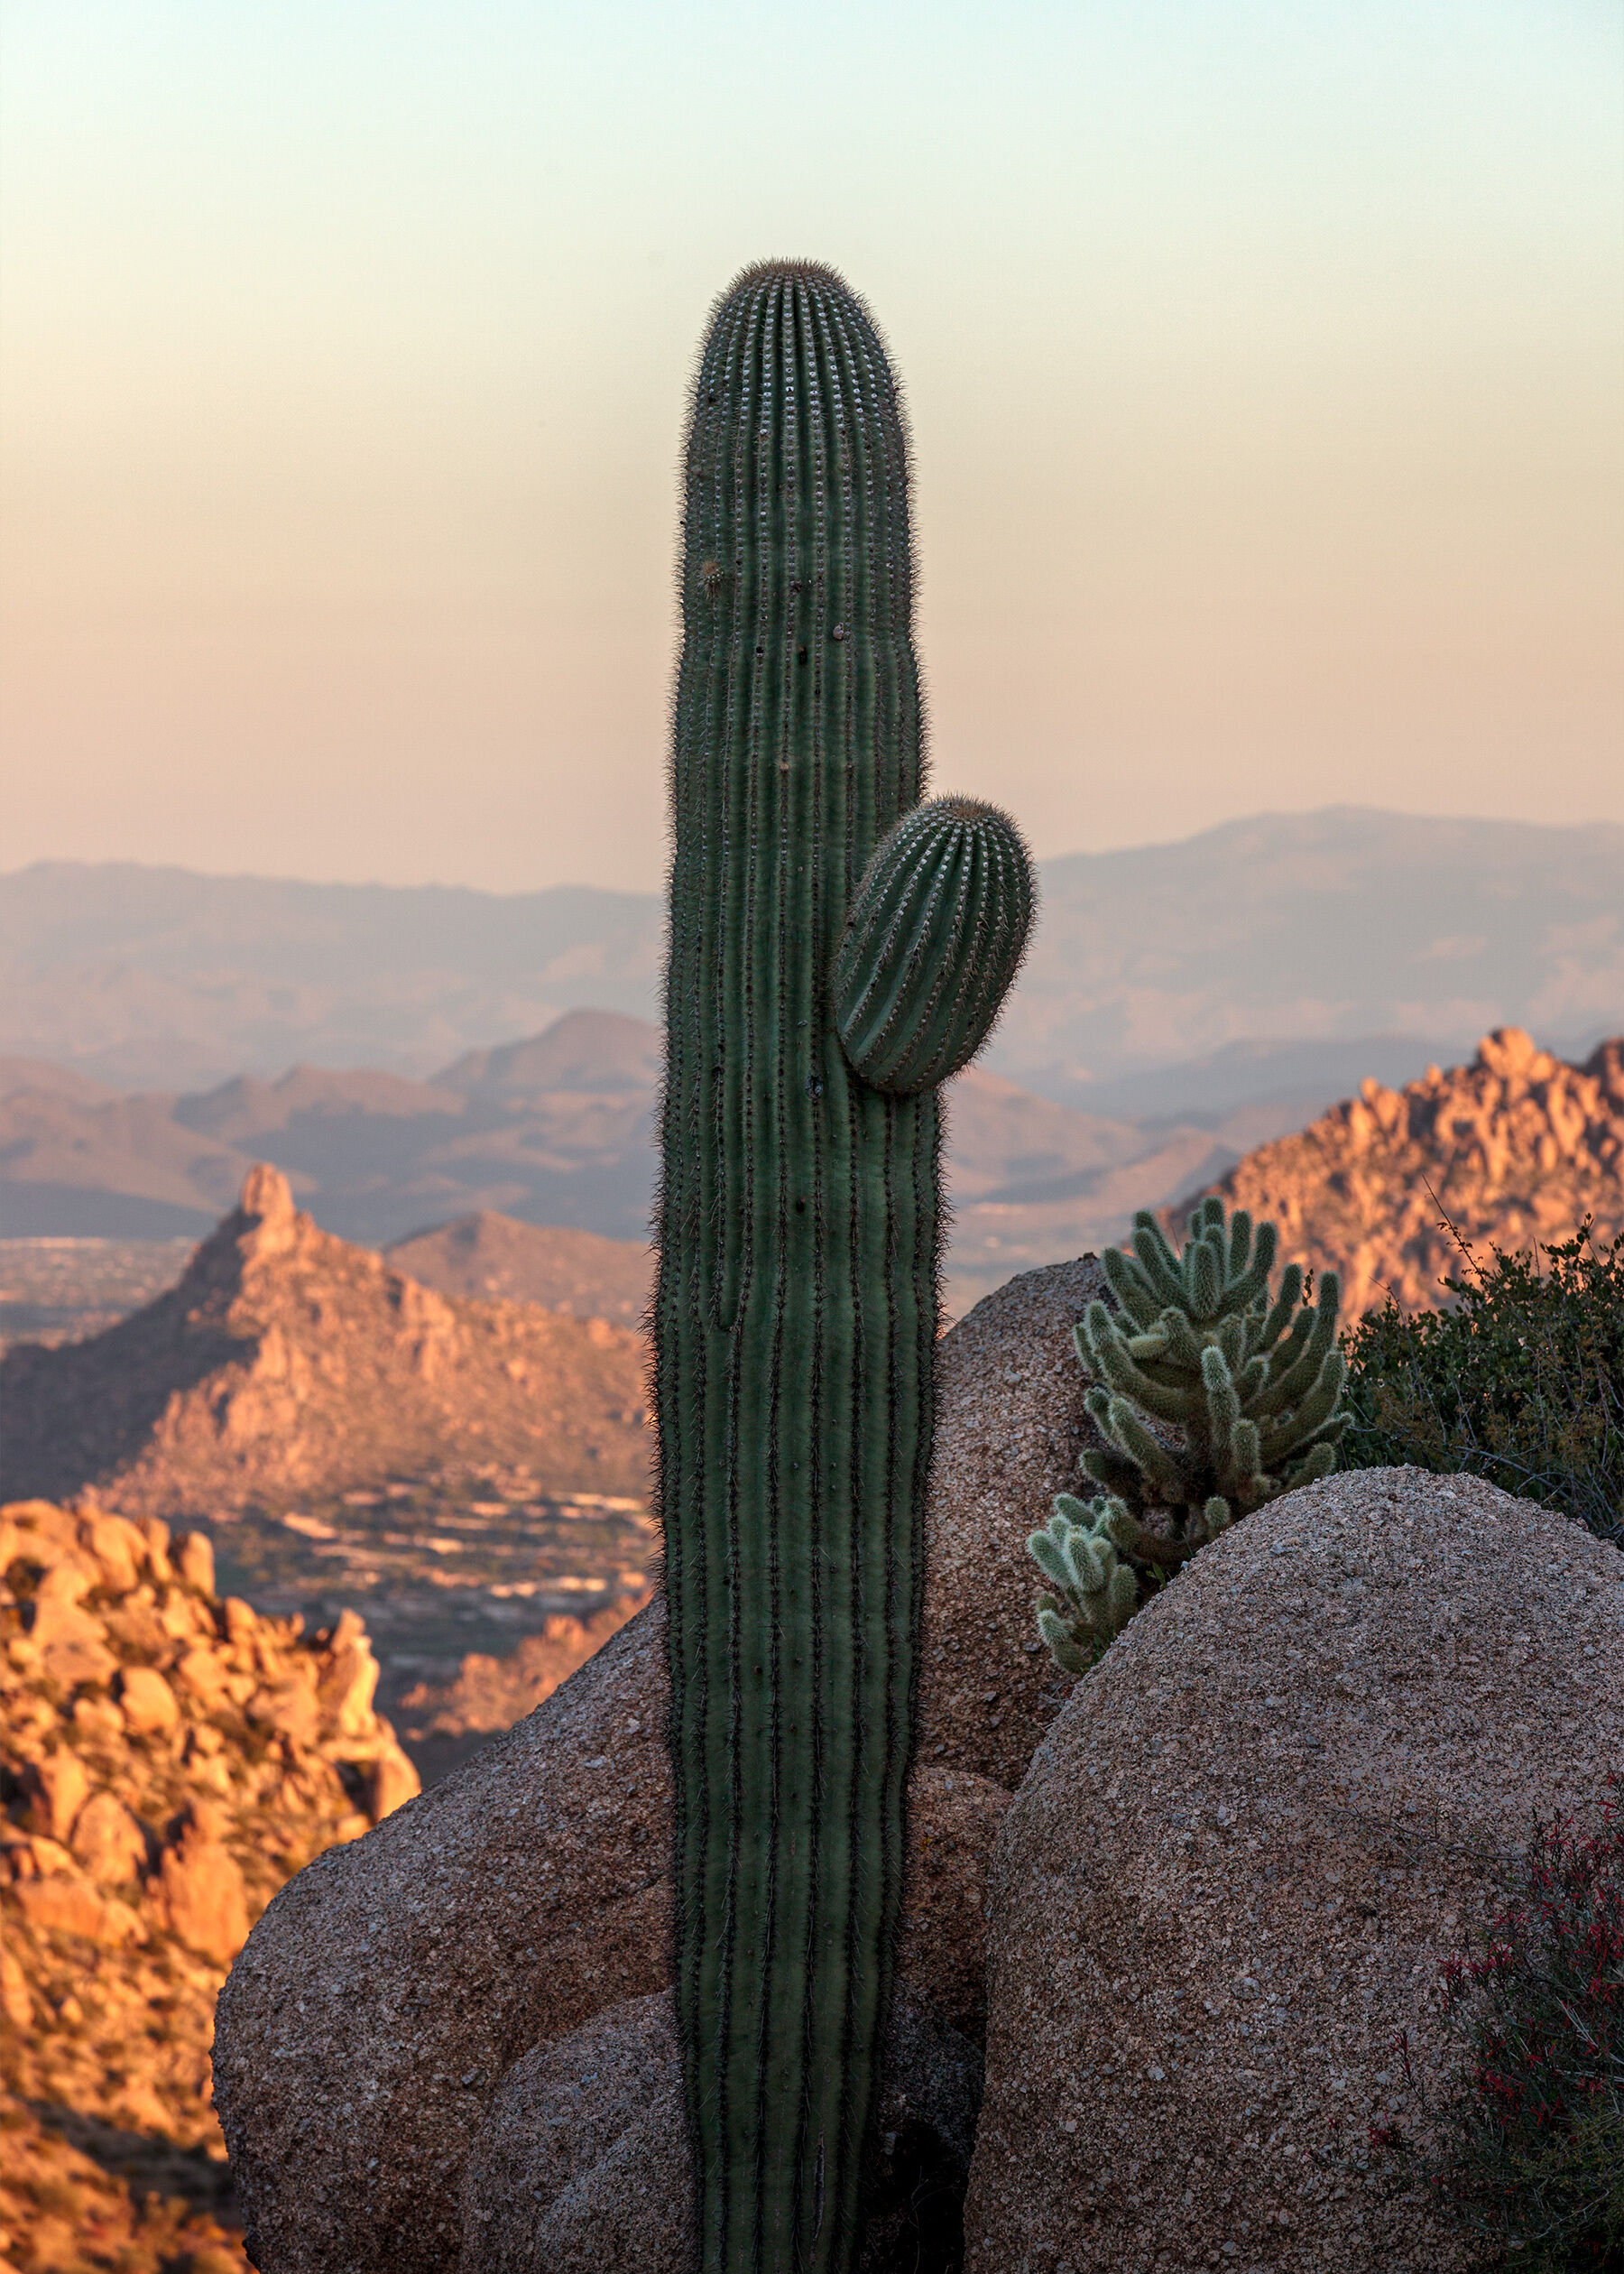 Saguaro cactus at Tom's Thumb, Arizona with warm sunrise light on layers of mountains in the backgorund